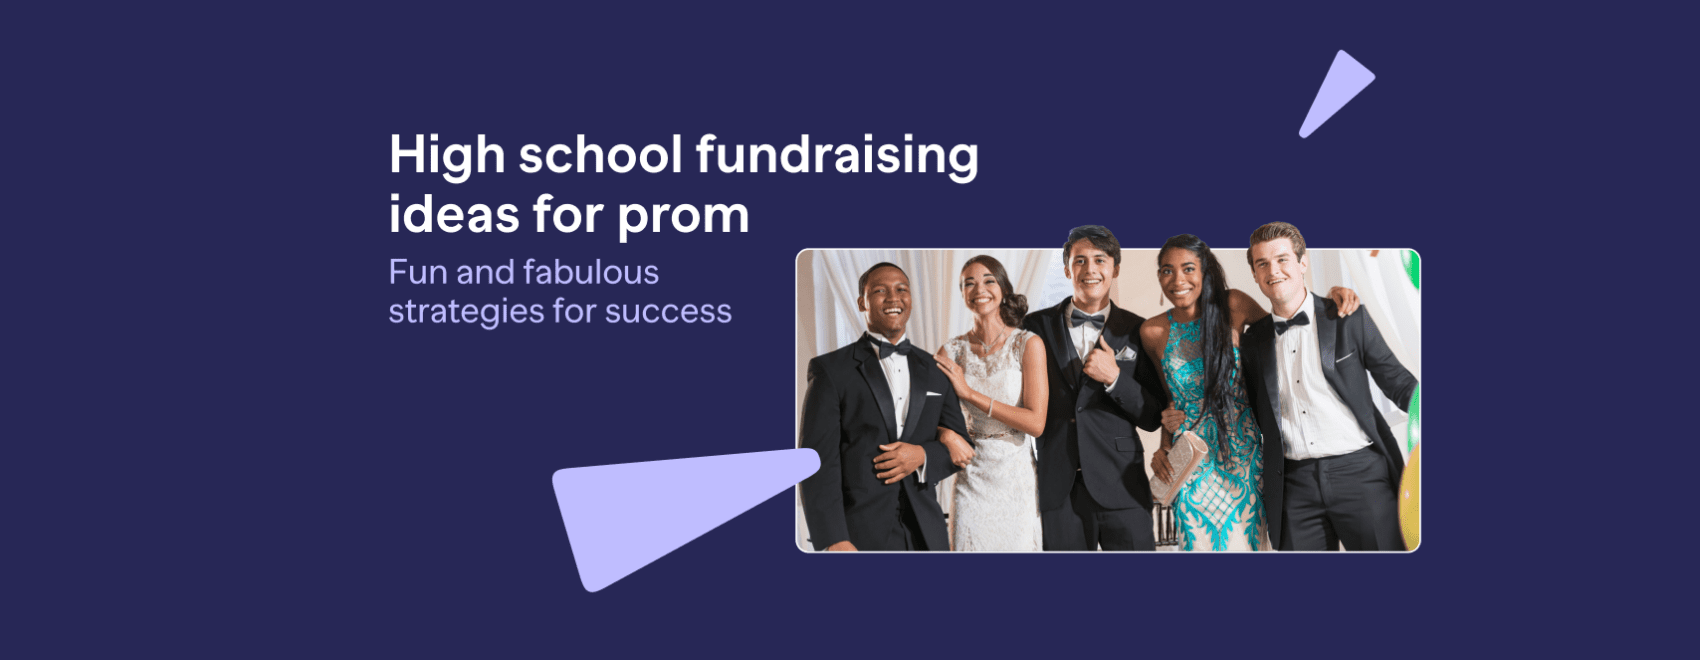 High school fundraising ideas for prom fun and fabulous strategies for success